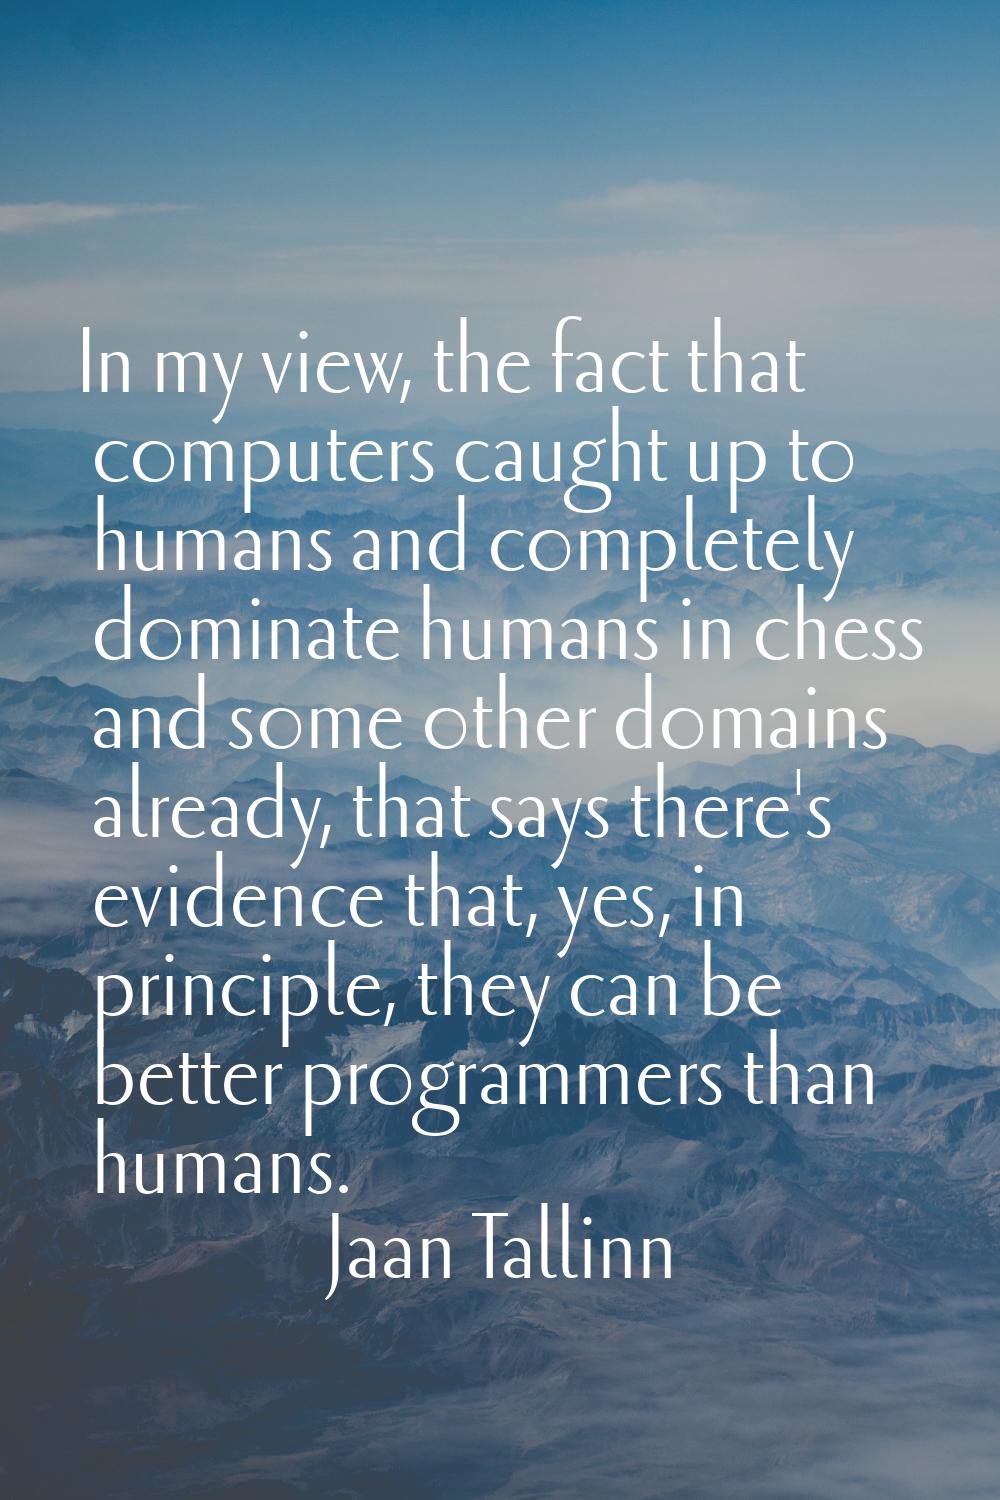 In my view, the fact that computers caught up to humans and completely dominate humans in chess and